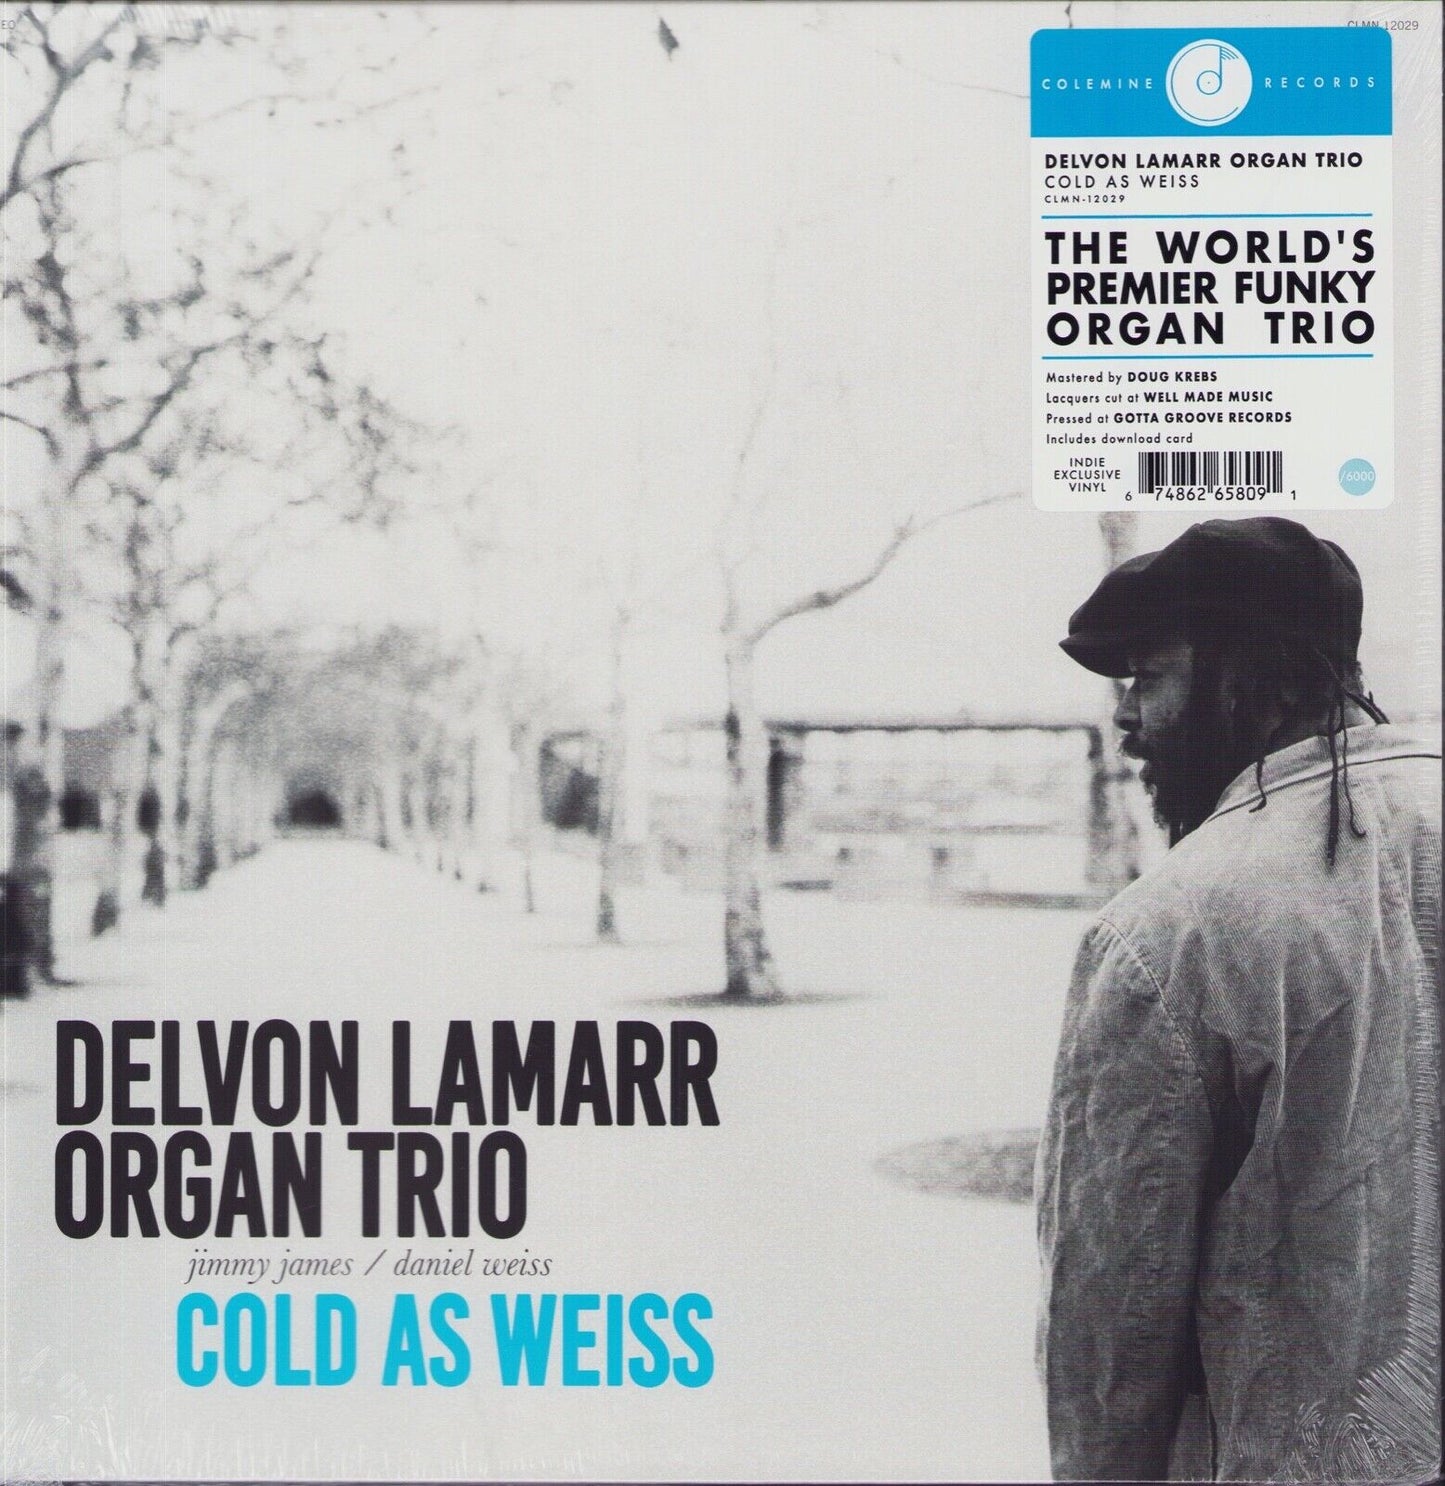 Delvon Lamarr Organ Trio - Cold As Weiss Clearwater Blue Vinyl LP Limited Edition